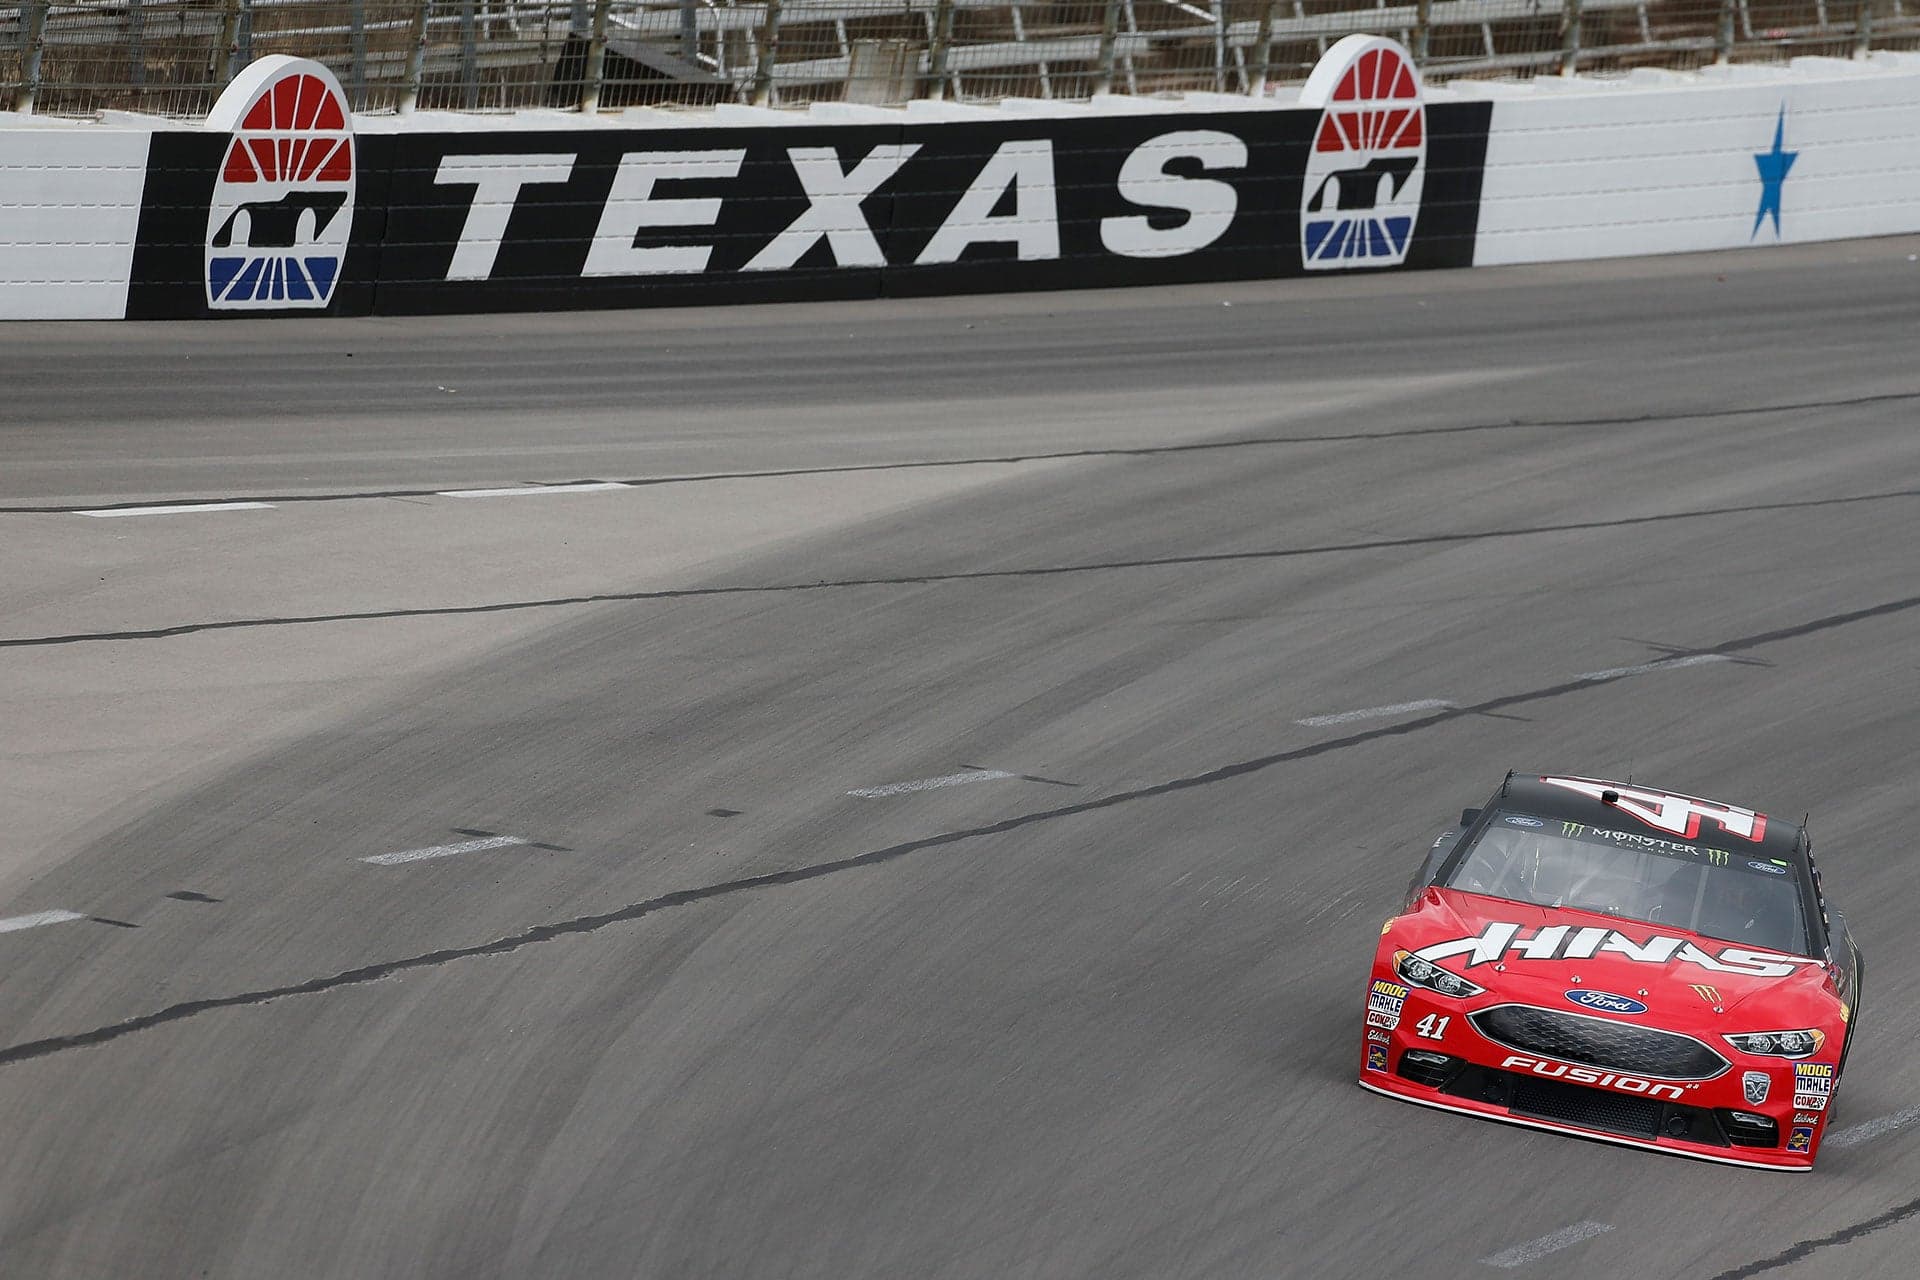 Preview: The O’Reilly Auto Parts 500 at Texas Motor Speedway